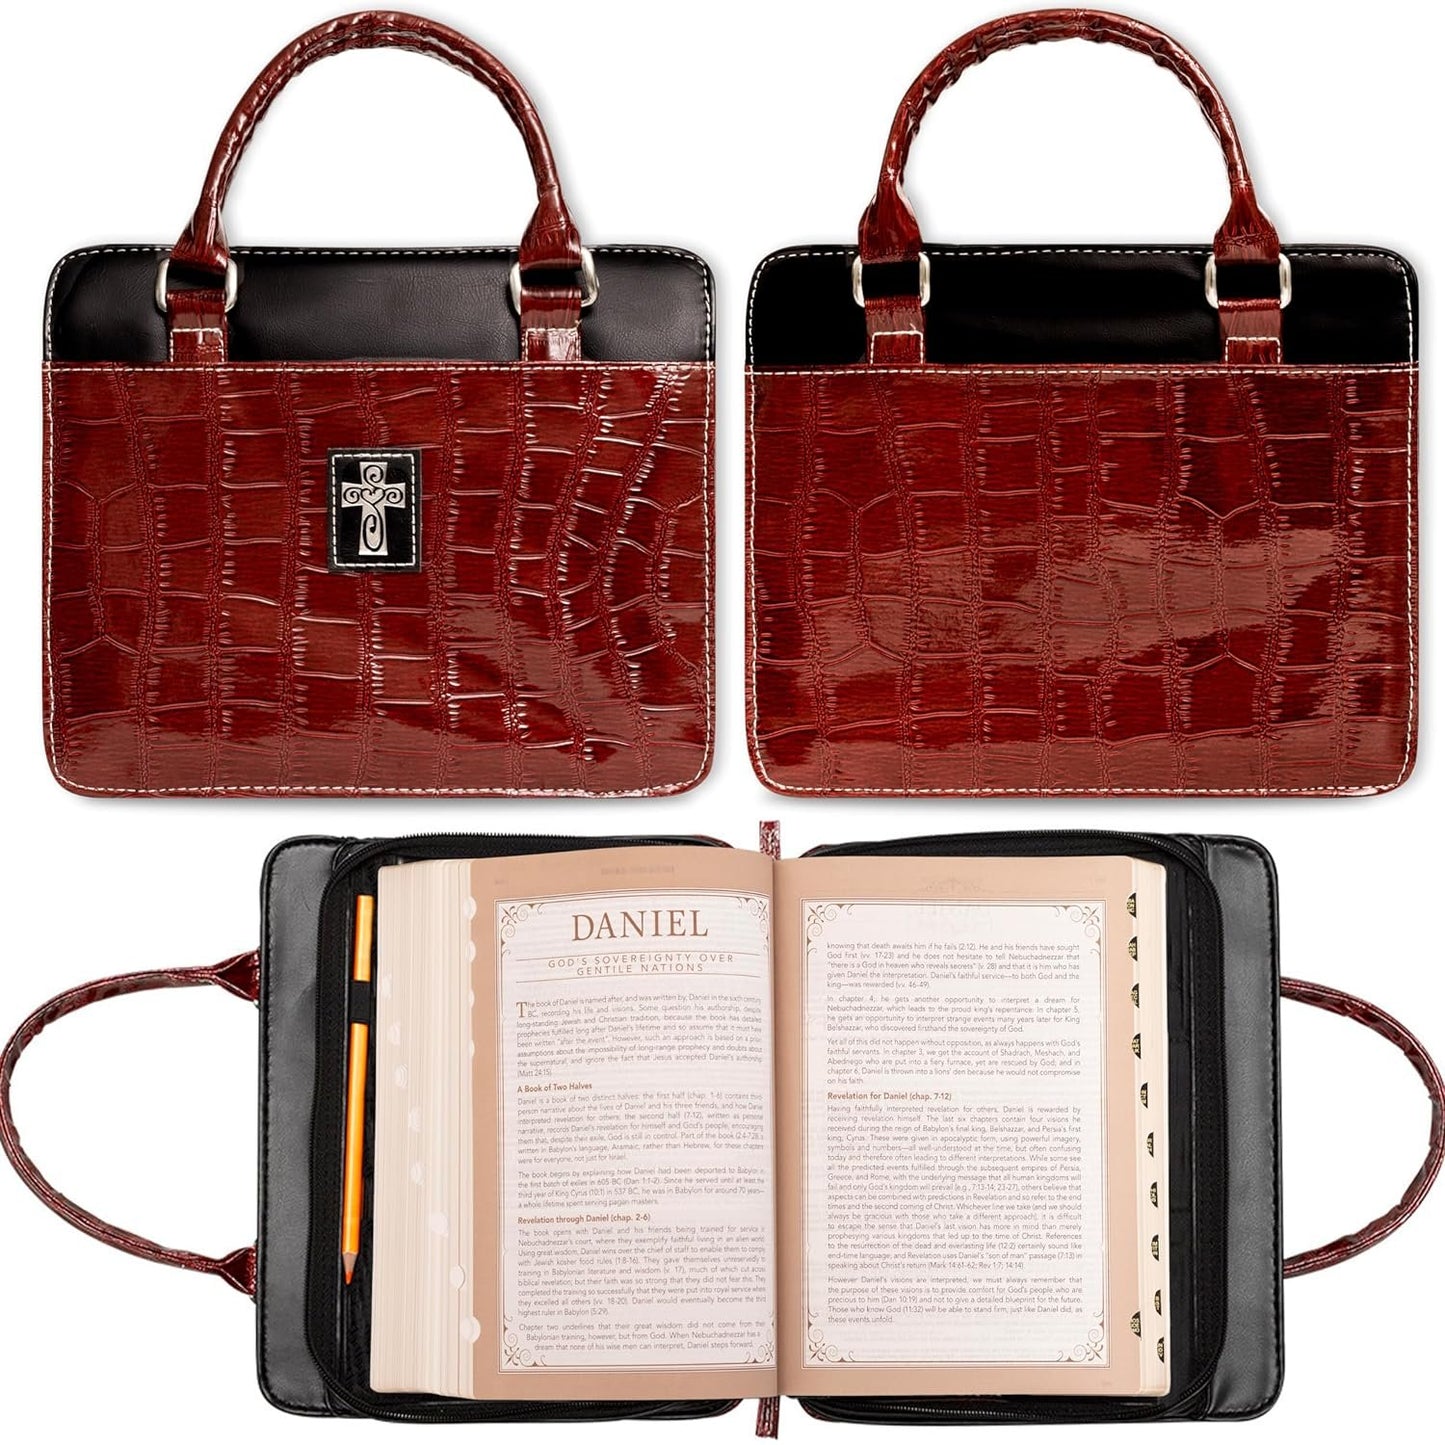 Christian Art Gifts Women's Fashion Bible Cover Purse Style, Burgundy Crocodile Faux Leather, Large